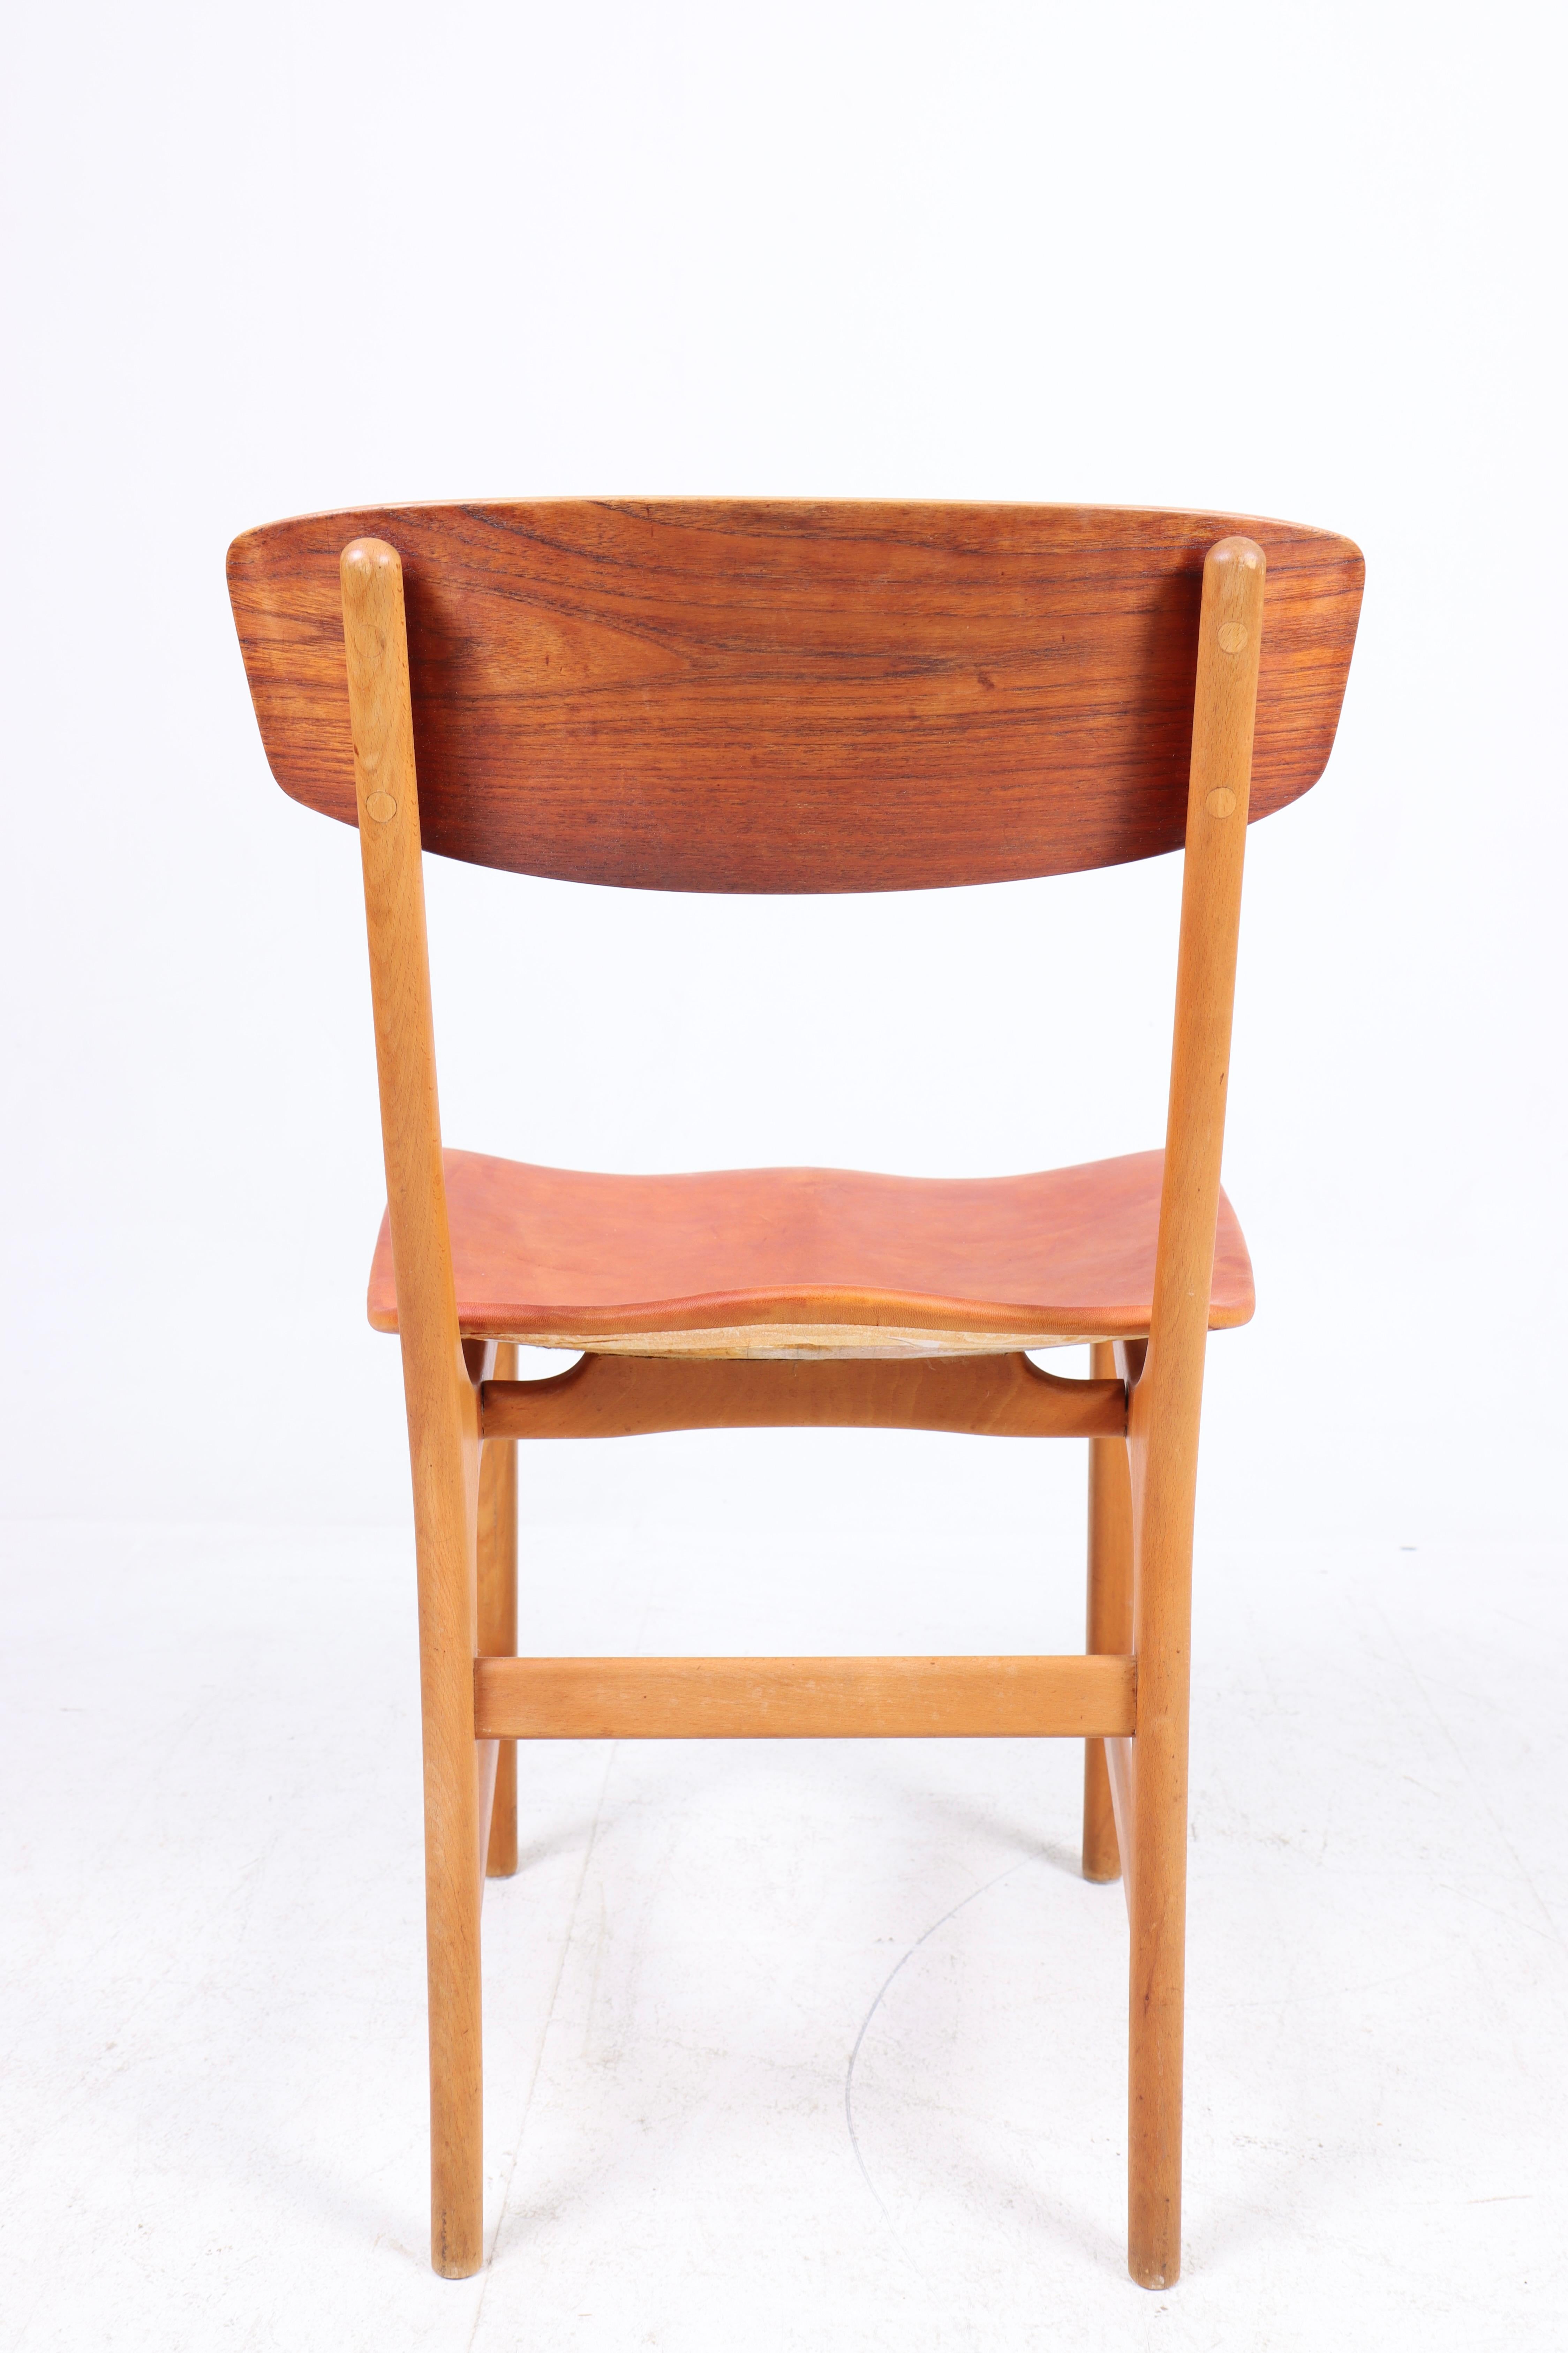 Set of Four Side Chairs in Teak and Leather, Danish Design, 1960s For Sale 5